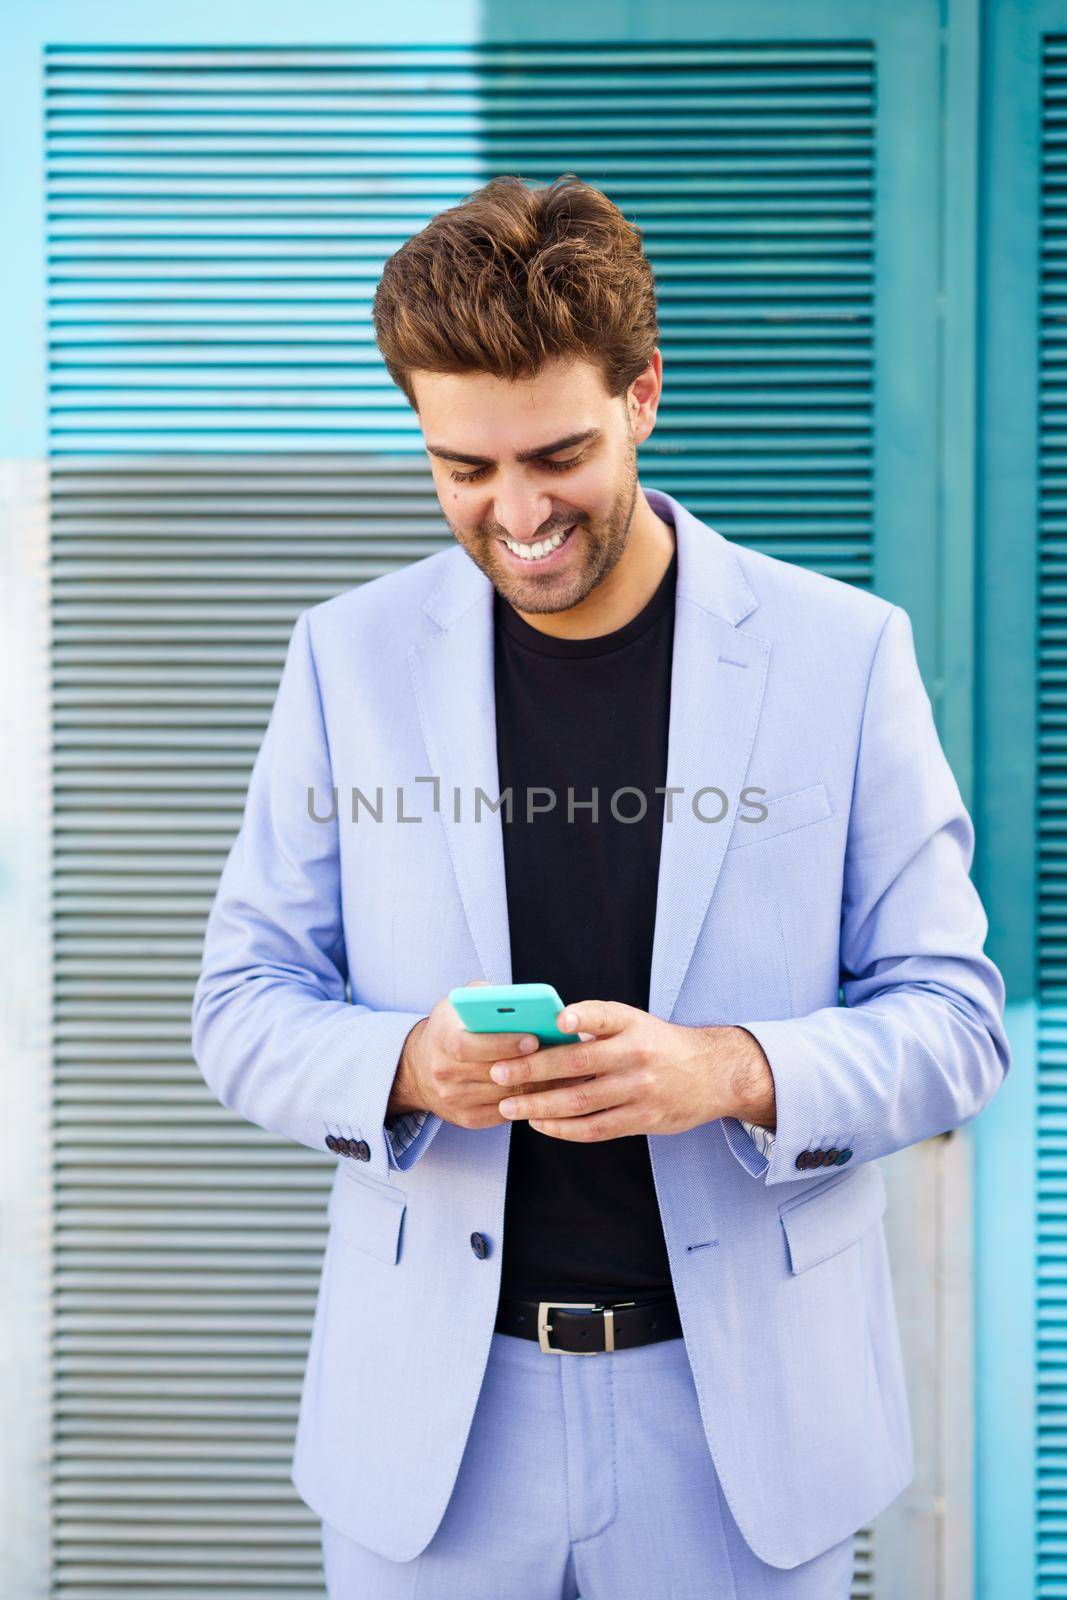 Smiling man wearing blue suit texting with a smartphone in urban background.